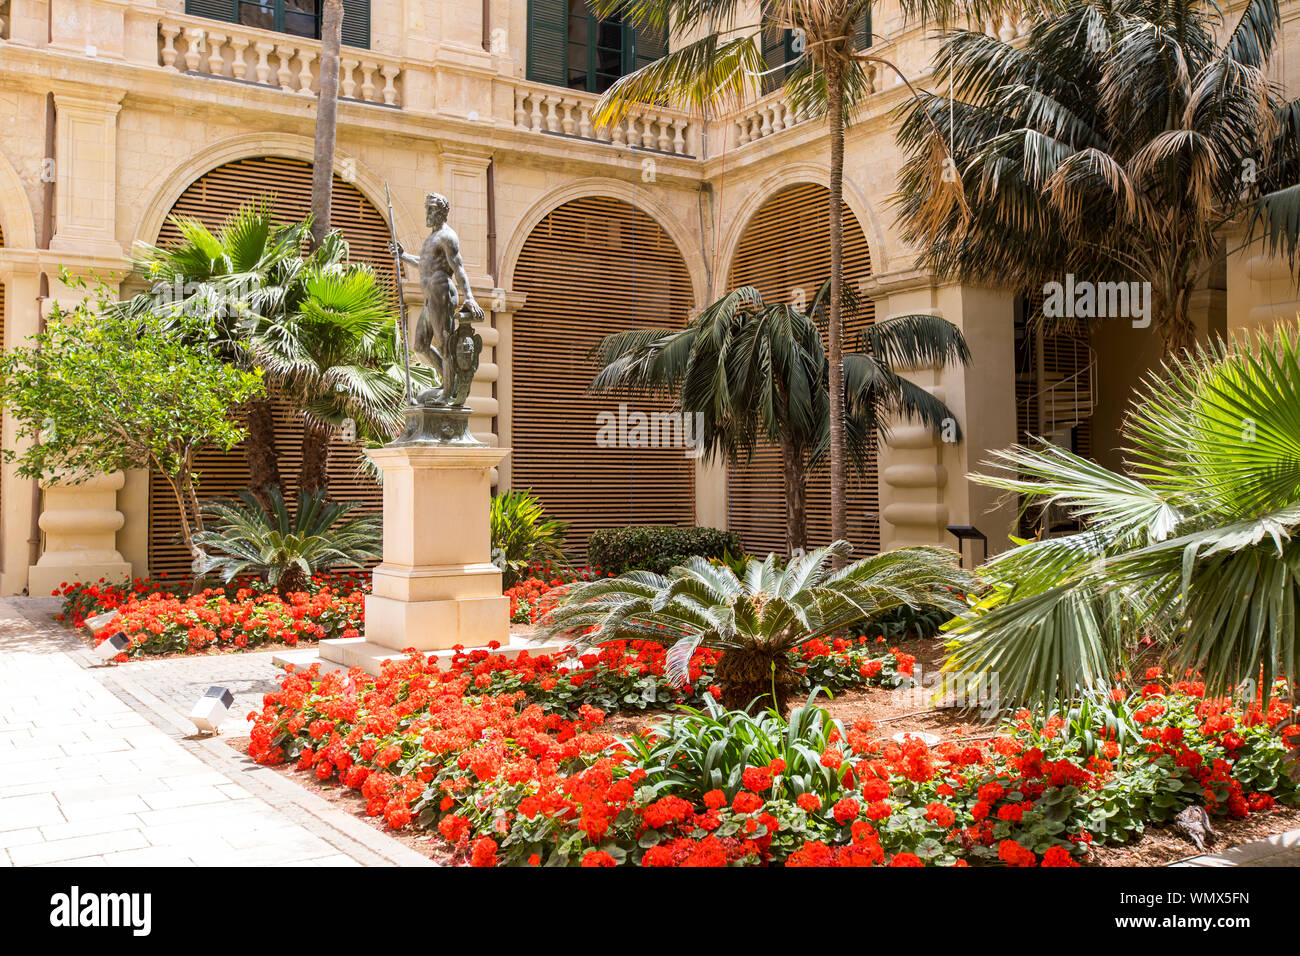 Malta, Valetta, Old Town, Grand Masters Palace, Neptune Square, Courtyard, Museum, Stock Photo